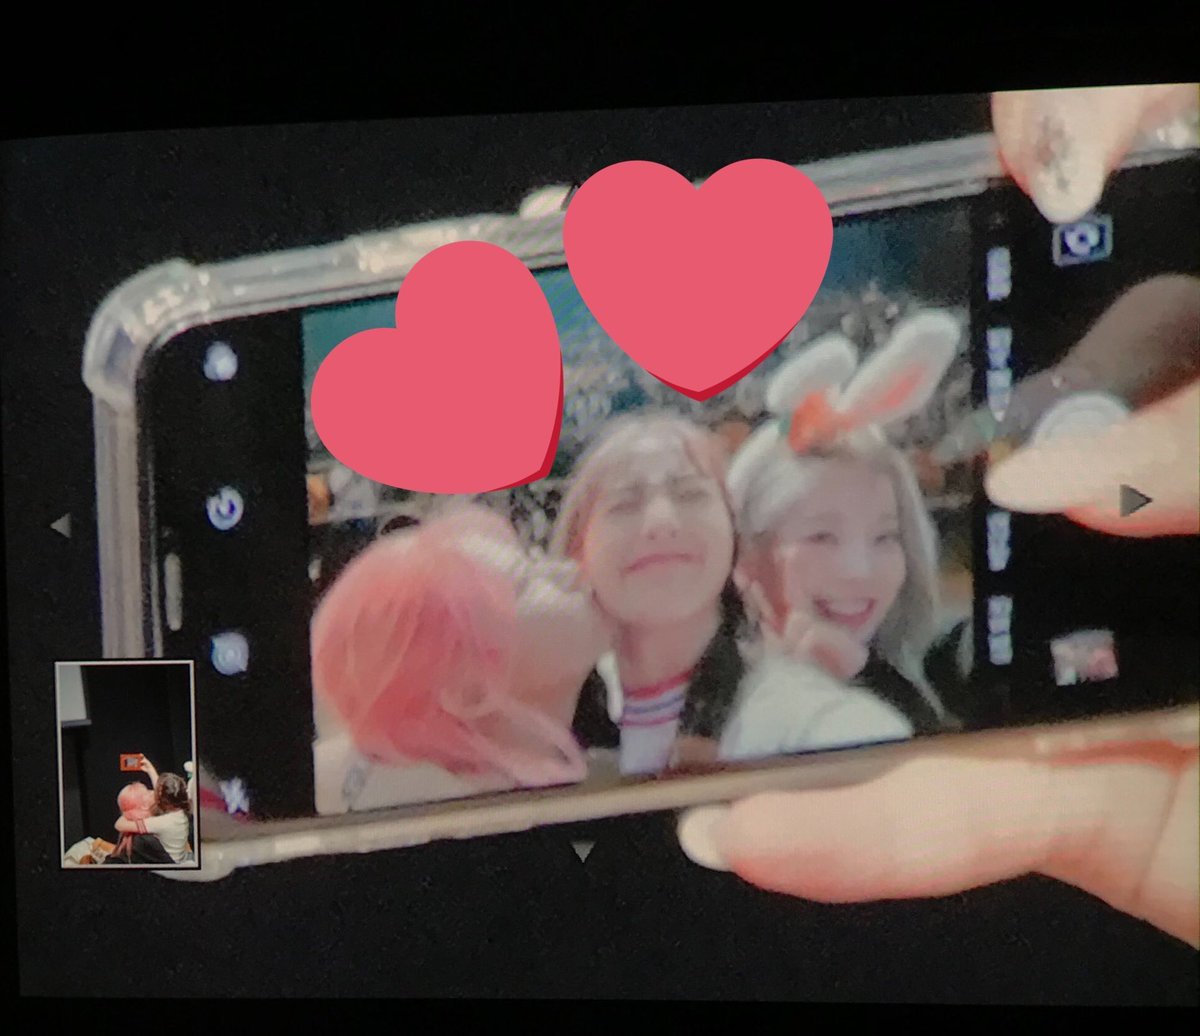 let's just hope Jihyo will post it in Sana's bday